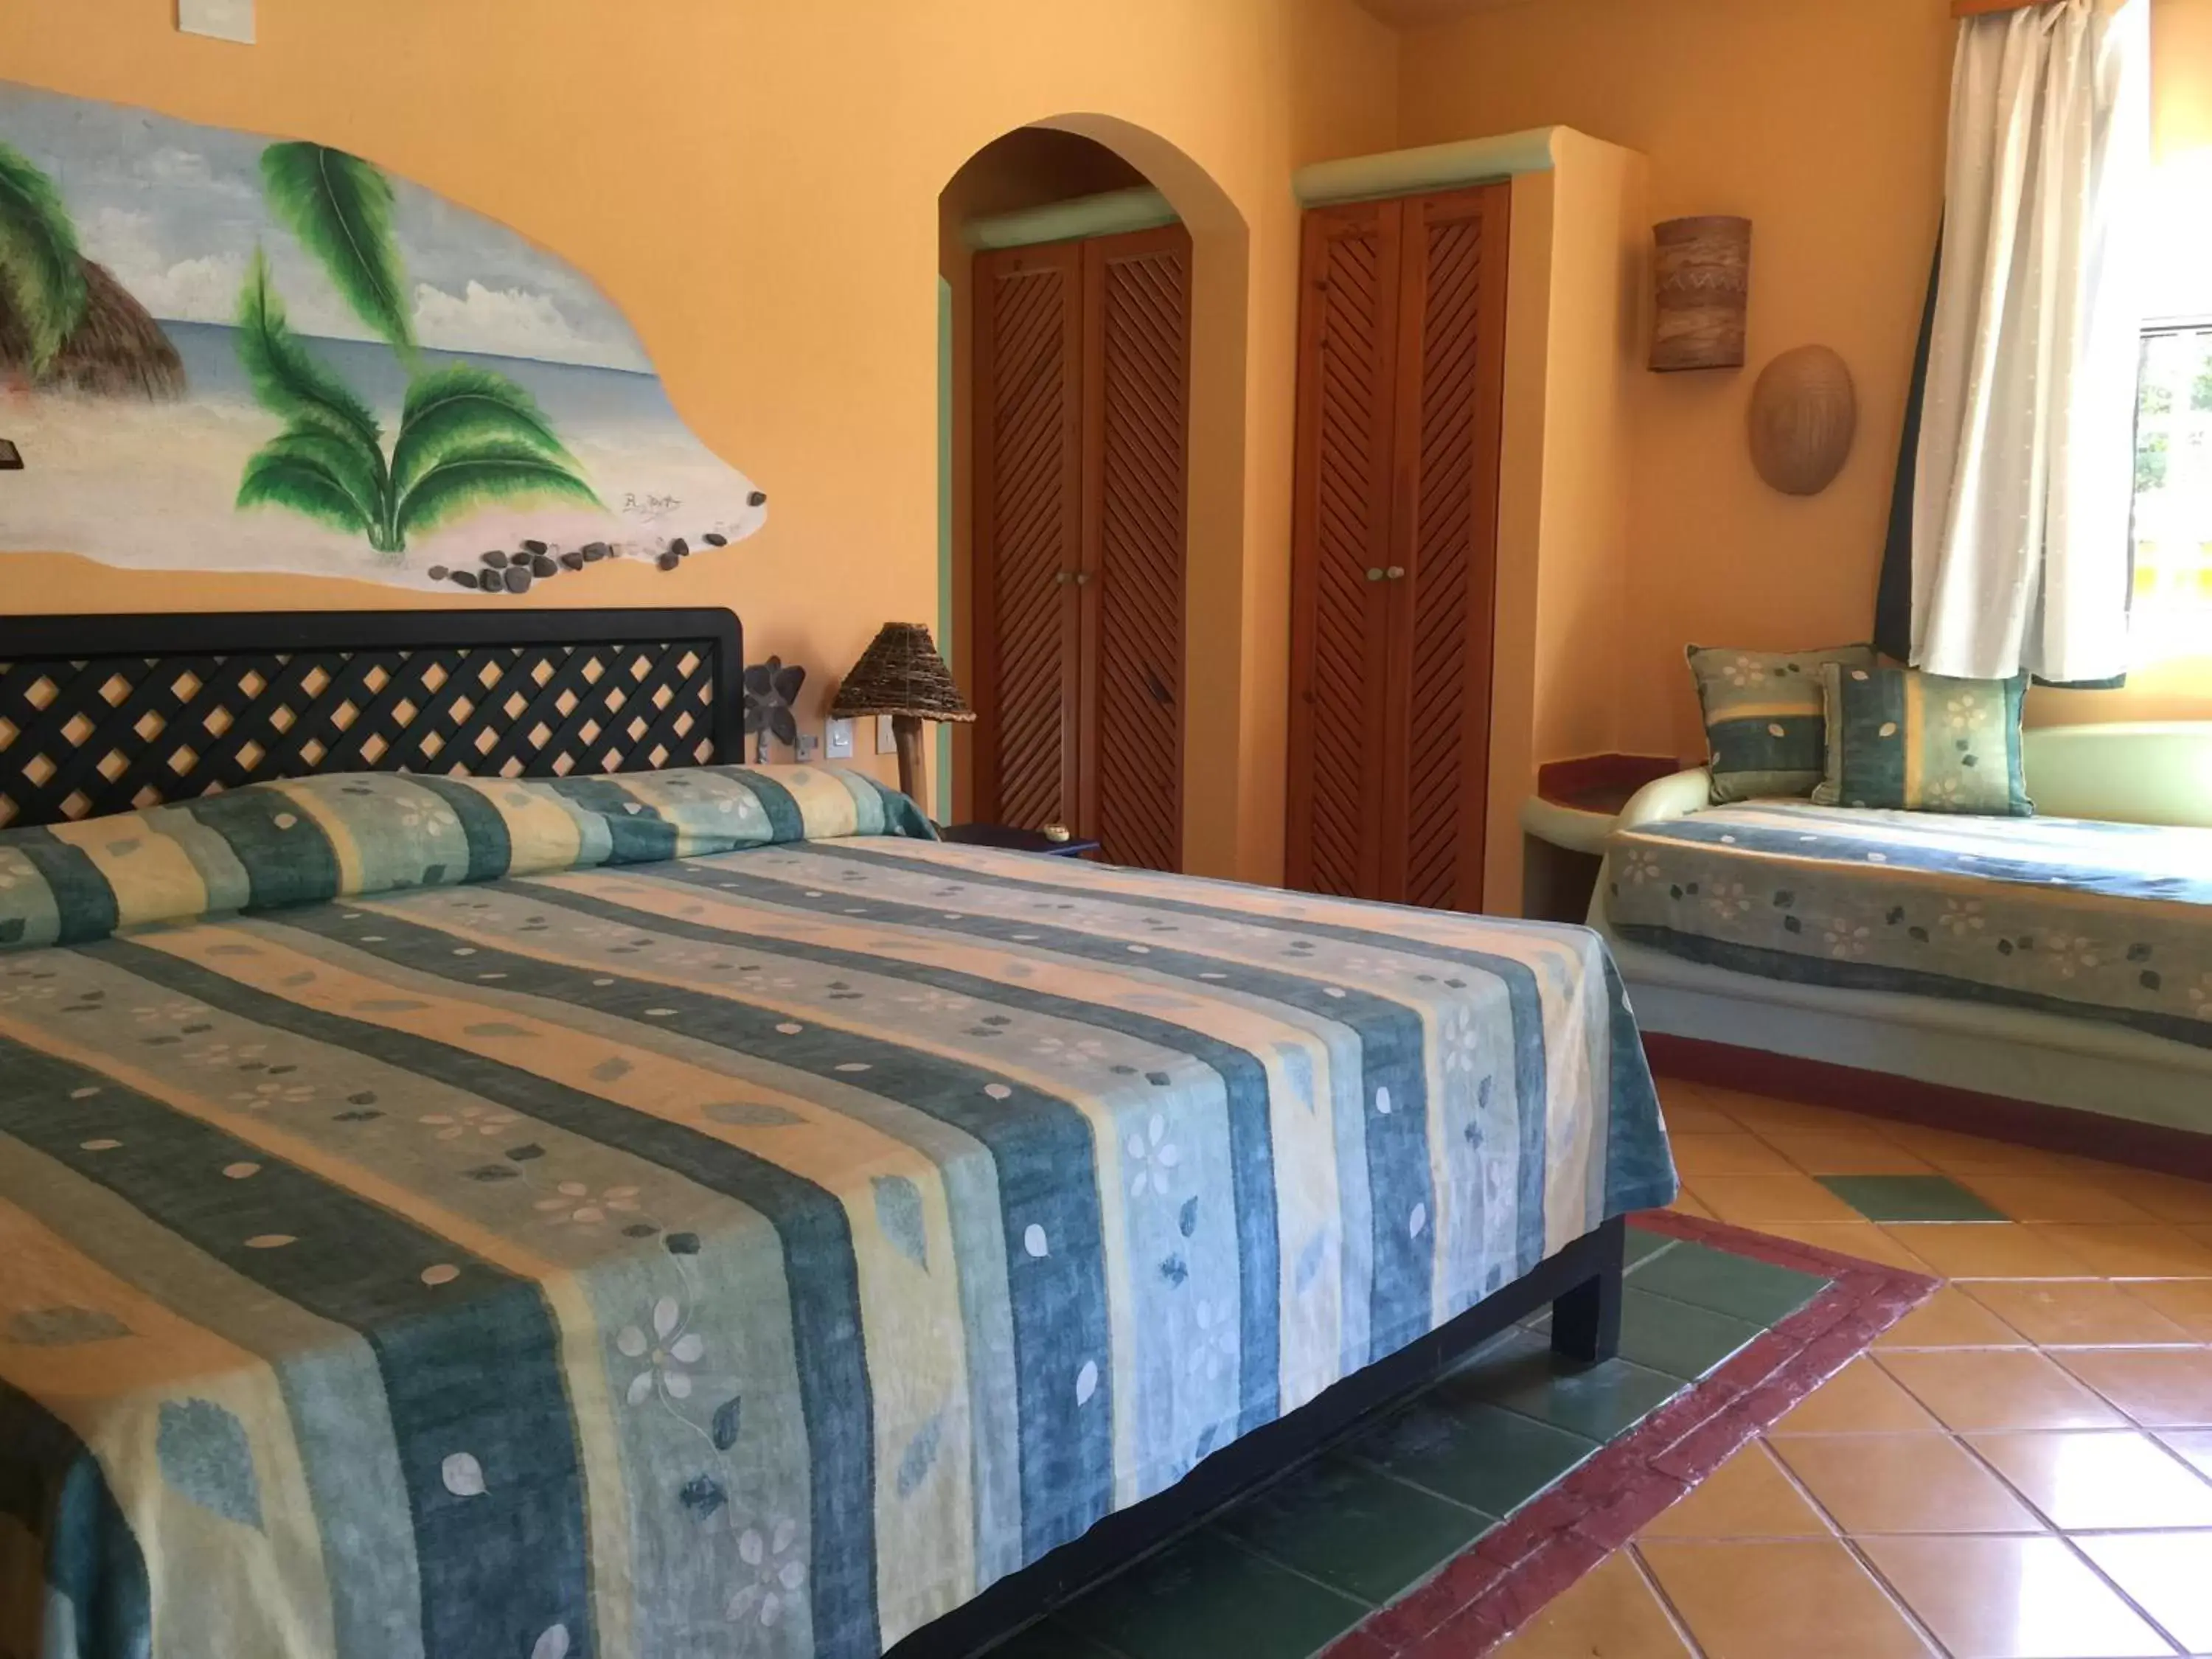 Bed in Hotel - Residencial Madrugada